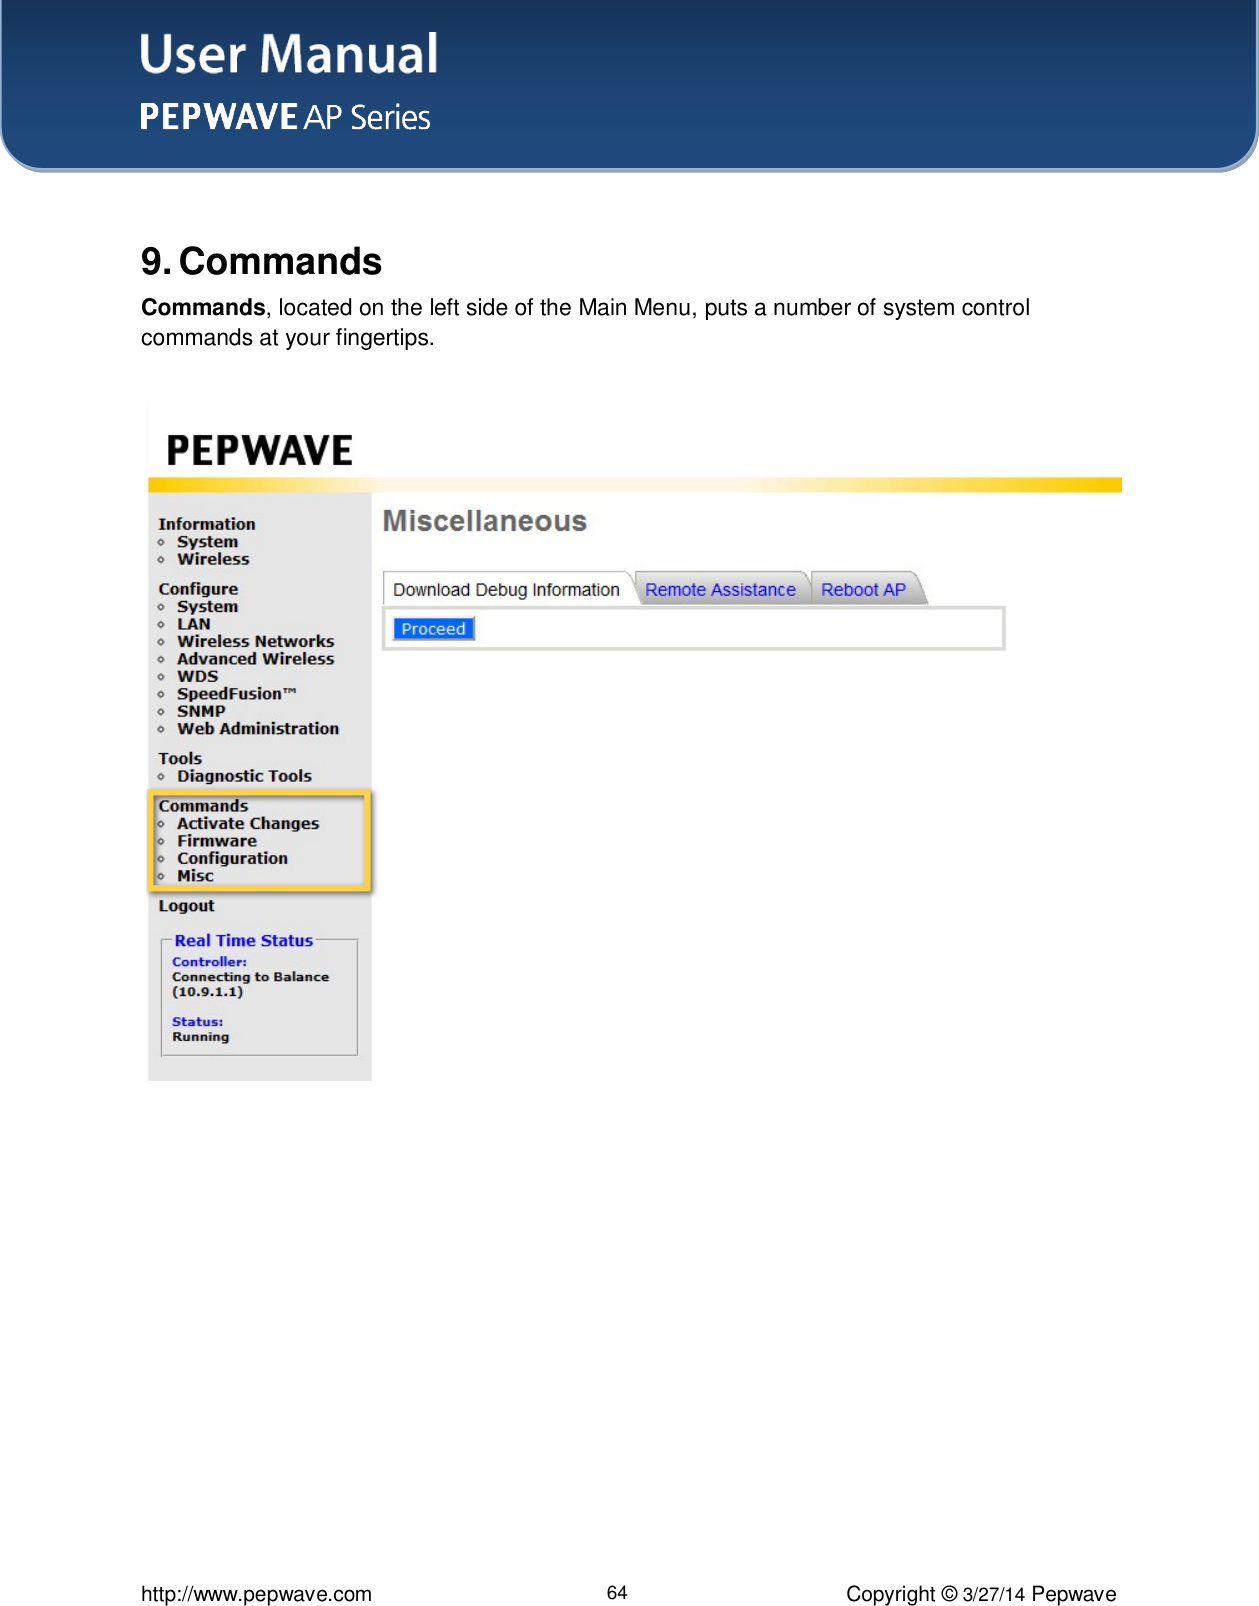 User Manual    http://www.pepwave.com 64 Copyright ©  3/27/14 Pepwave   9. Commands Commands, located on the left side of the Main Menu, puts a number of system control commands at your fingertips.  